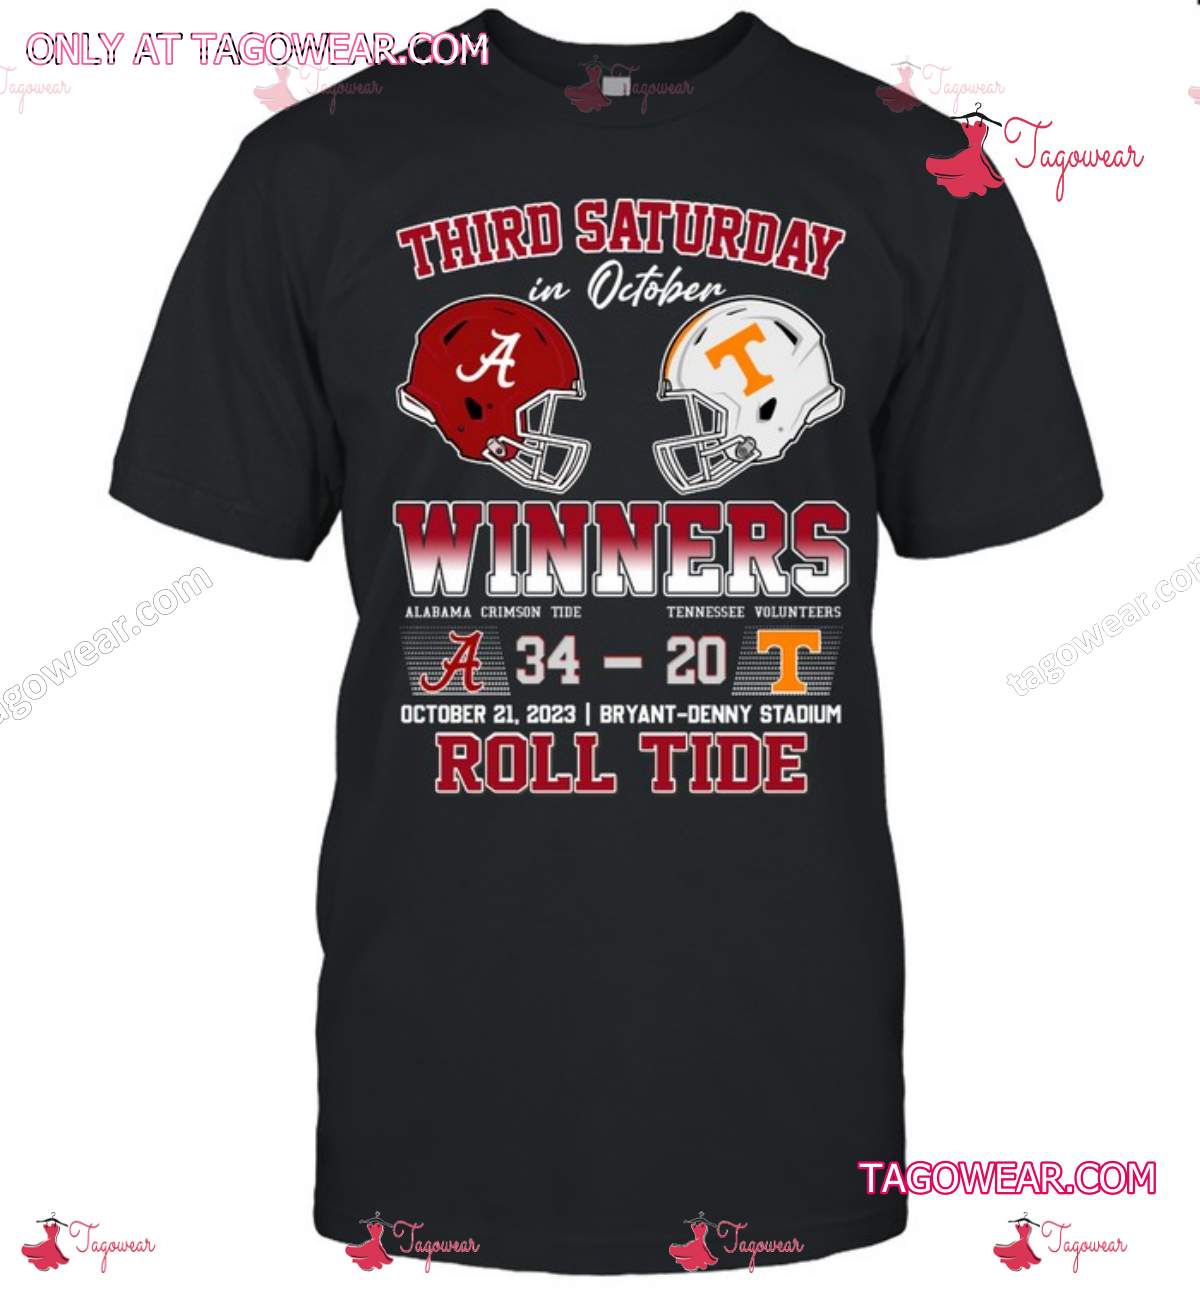 Third Saturday In October Winners Alabama Crimson Tide 34-20 Tennessee Volunteers Roll Tide Shirt a